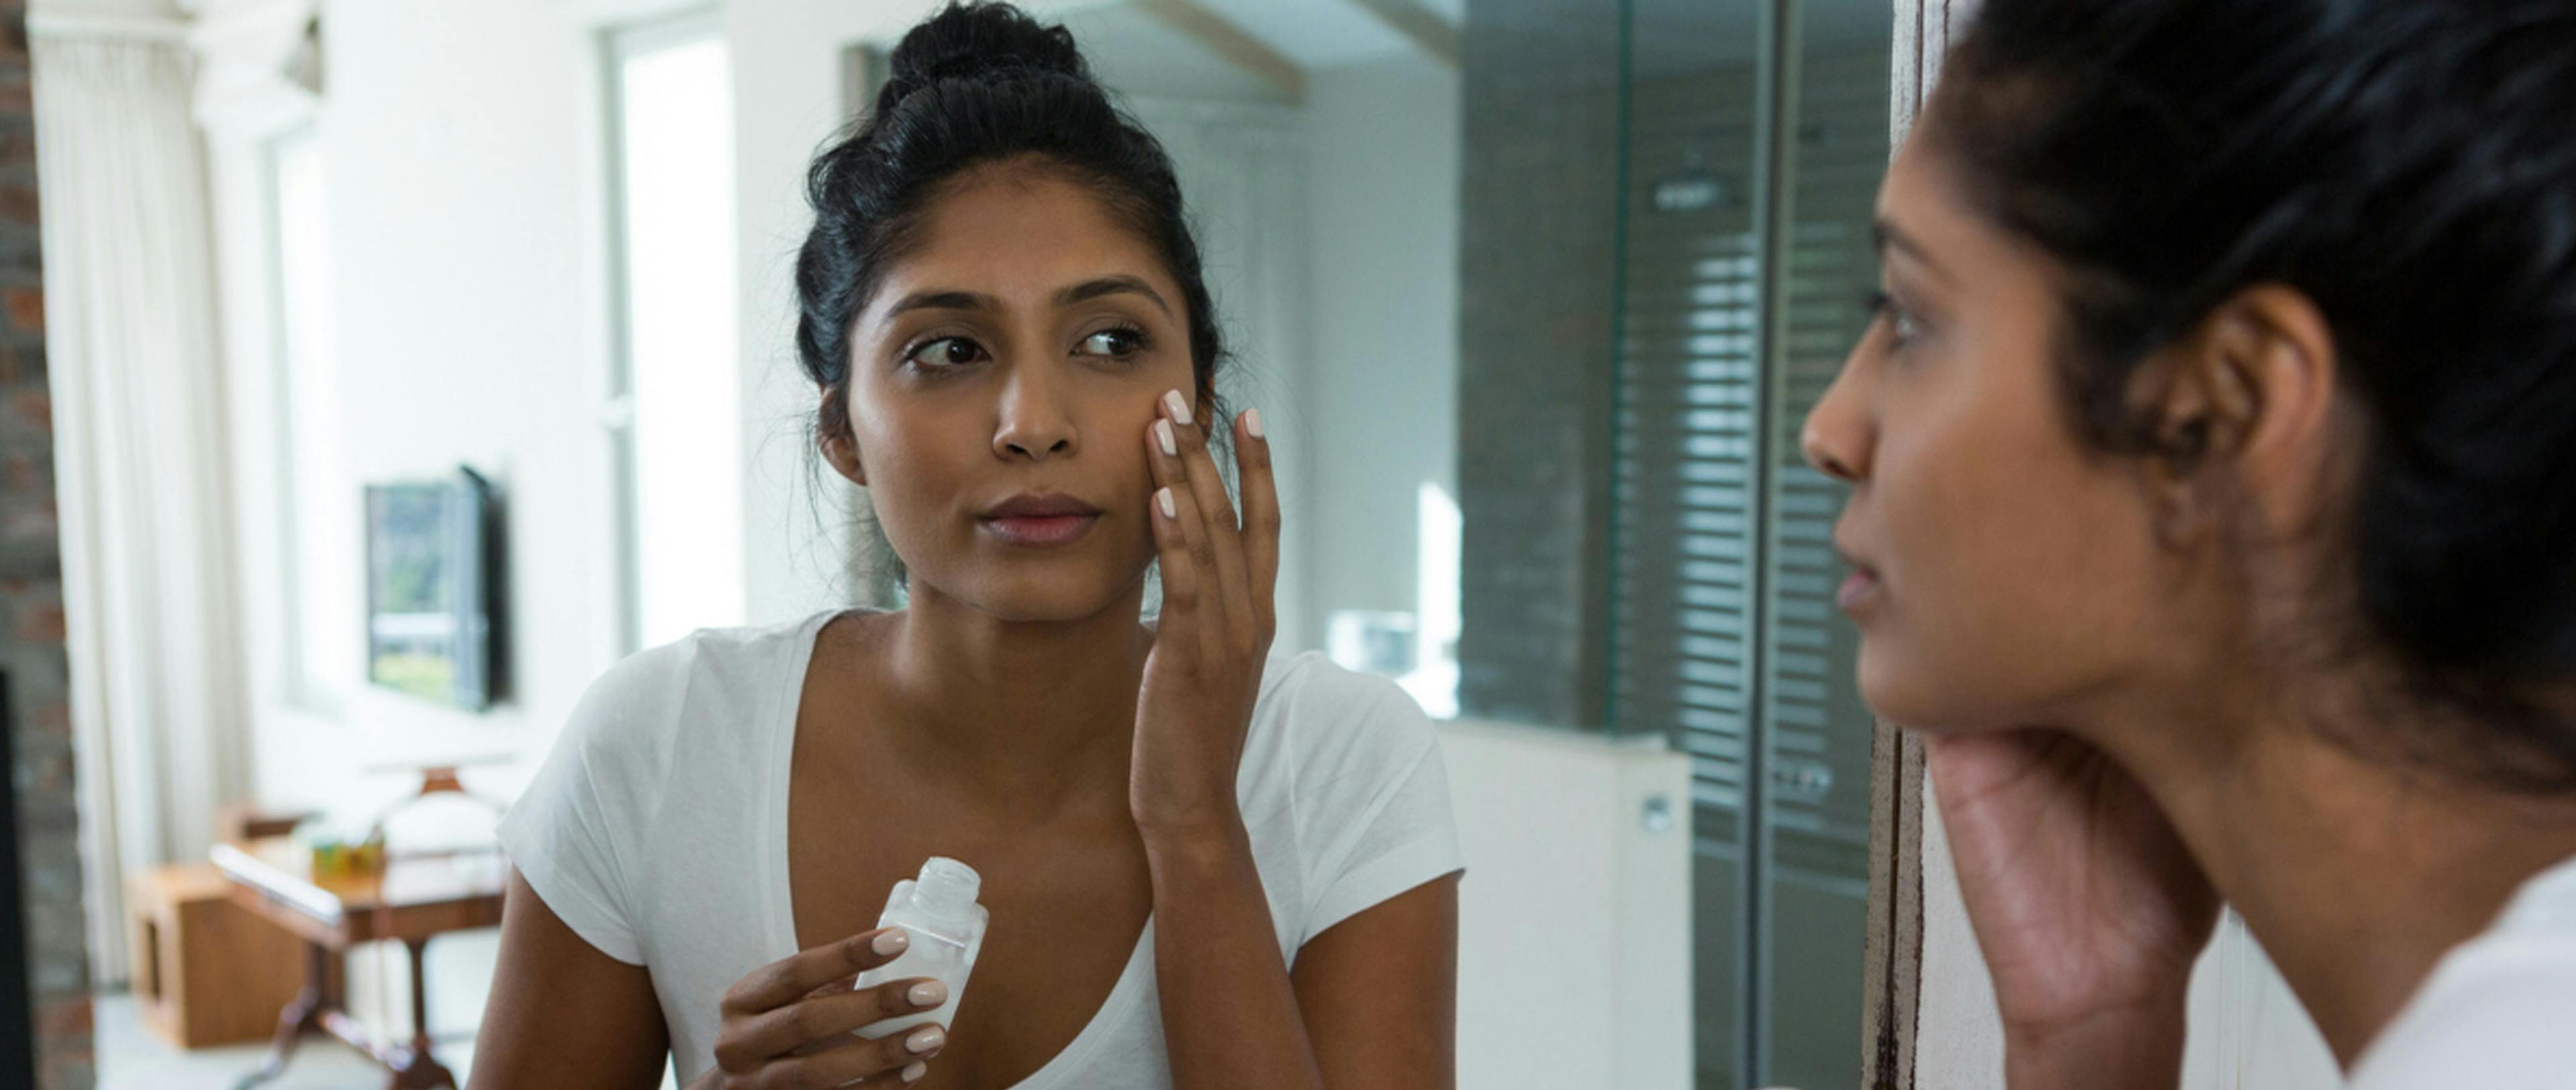 A woman standing in front of a mirror, looking at her reflection as she does her skincare routine.
